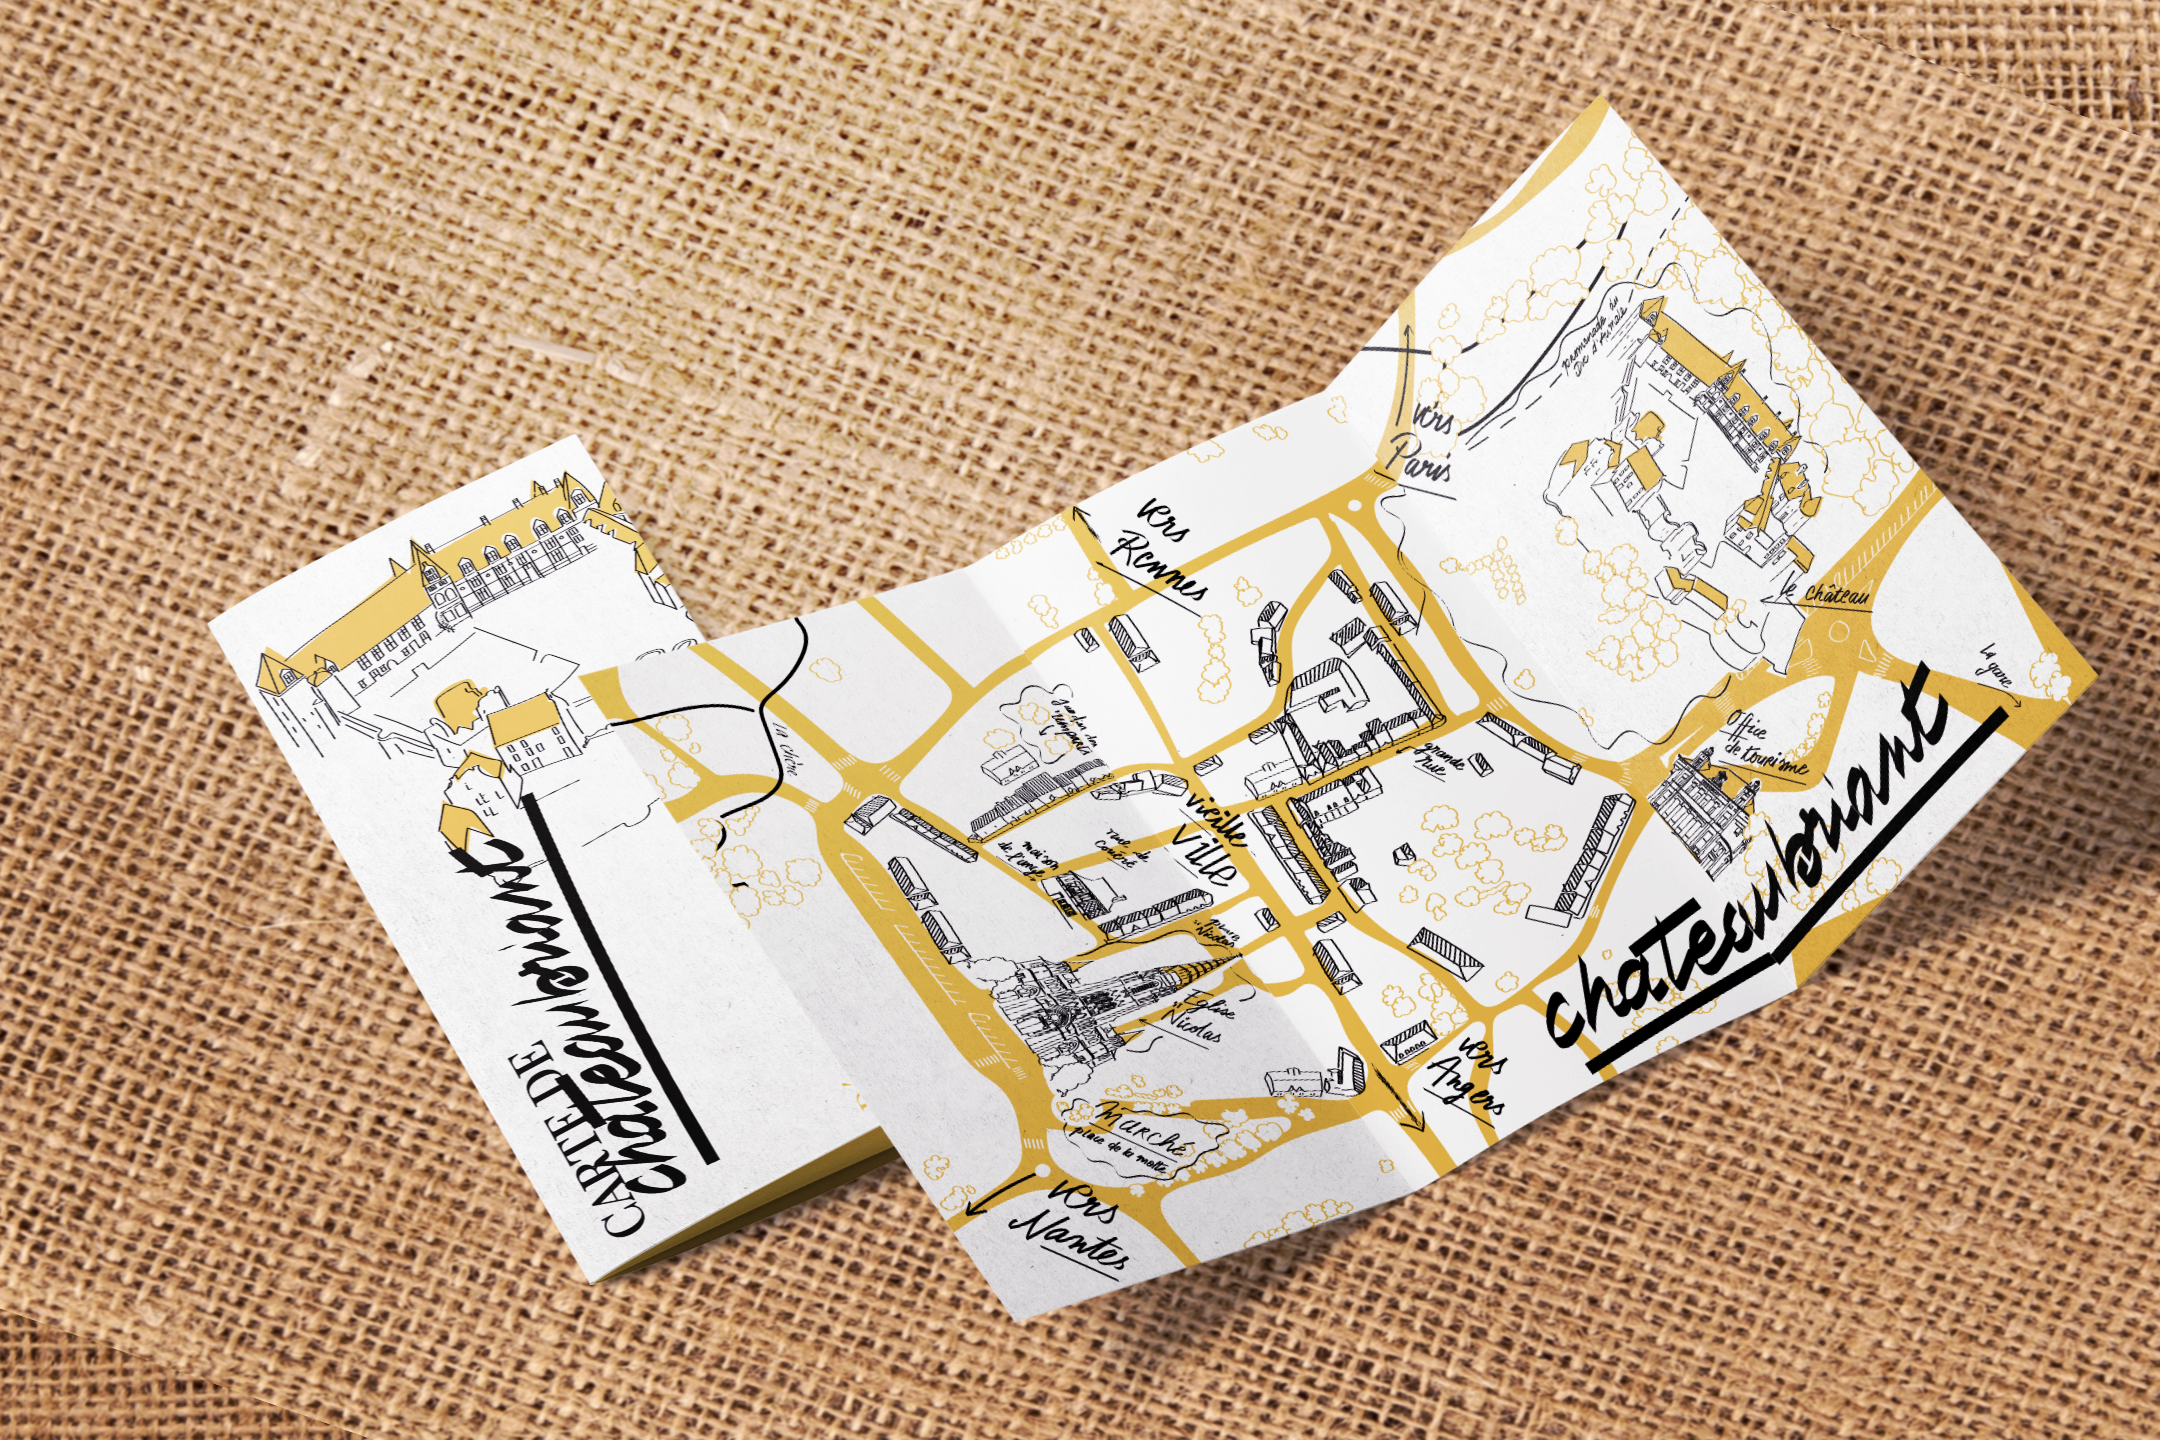 Redesign, chateaubriand flyer carto carte